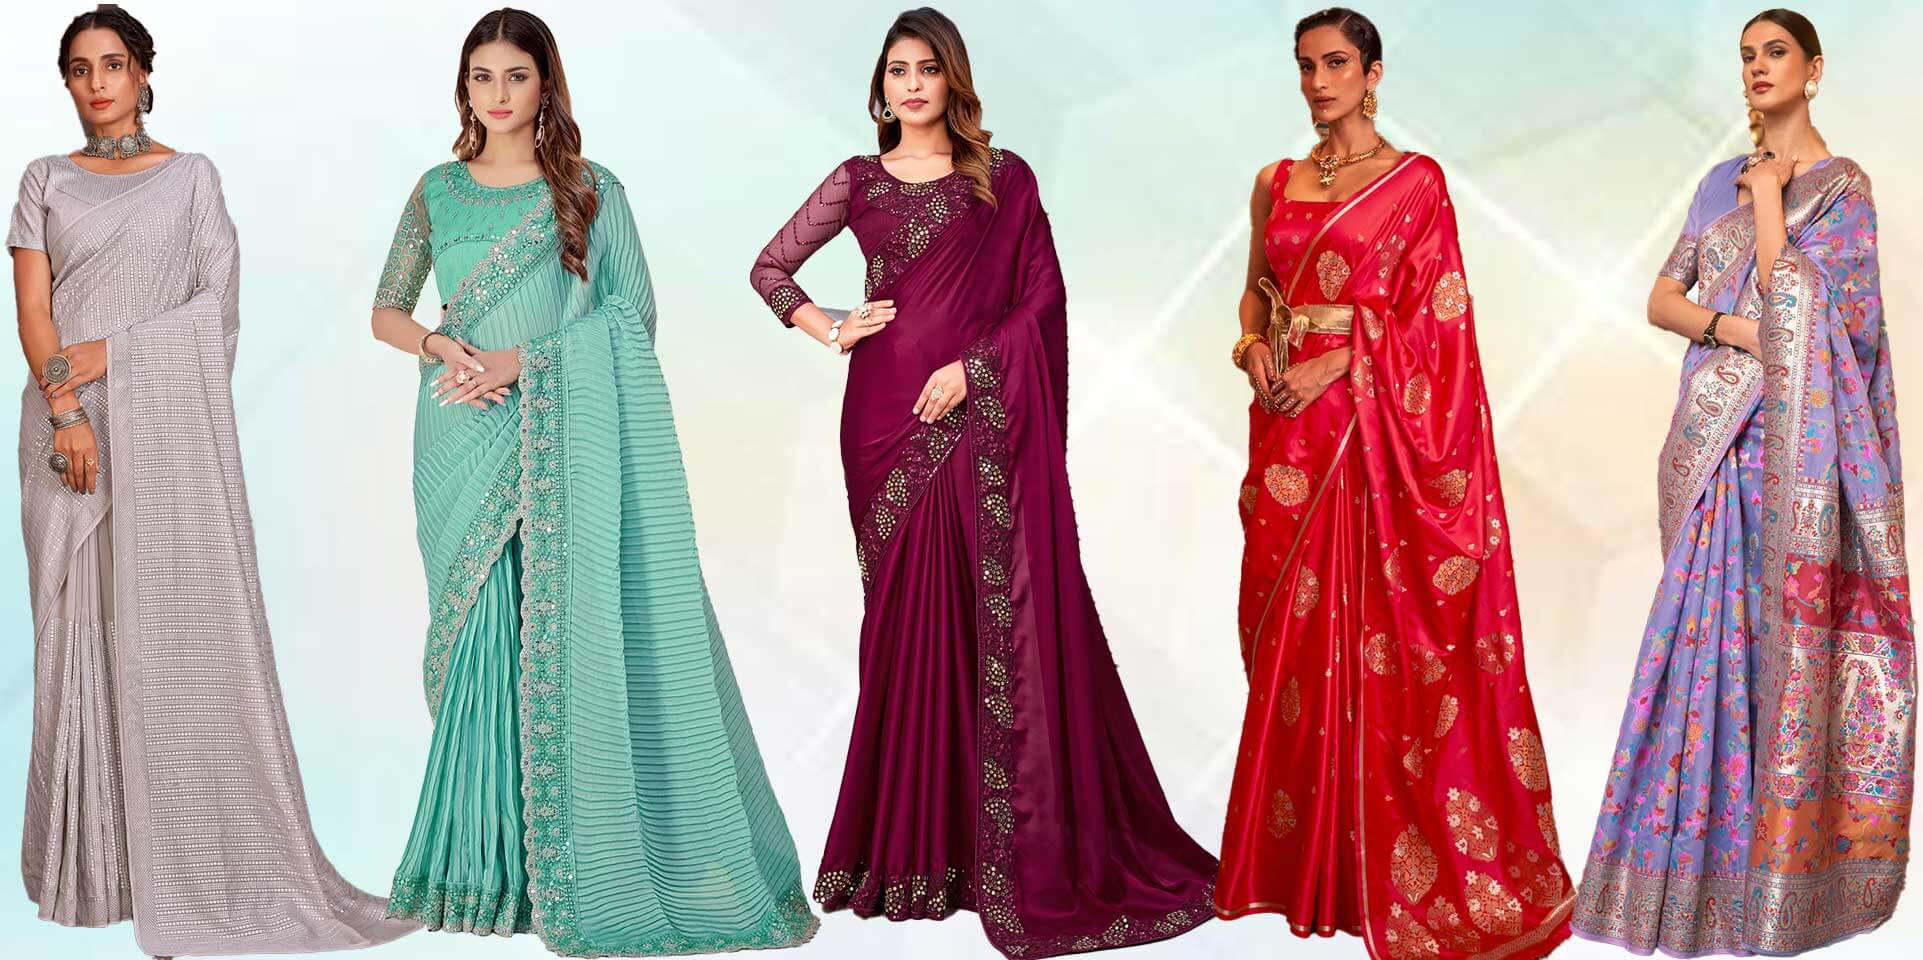 How to Select Silk Sarees for Wedding?